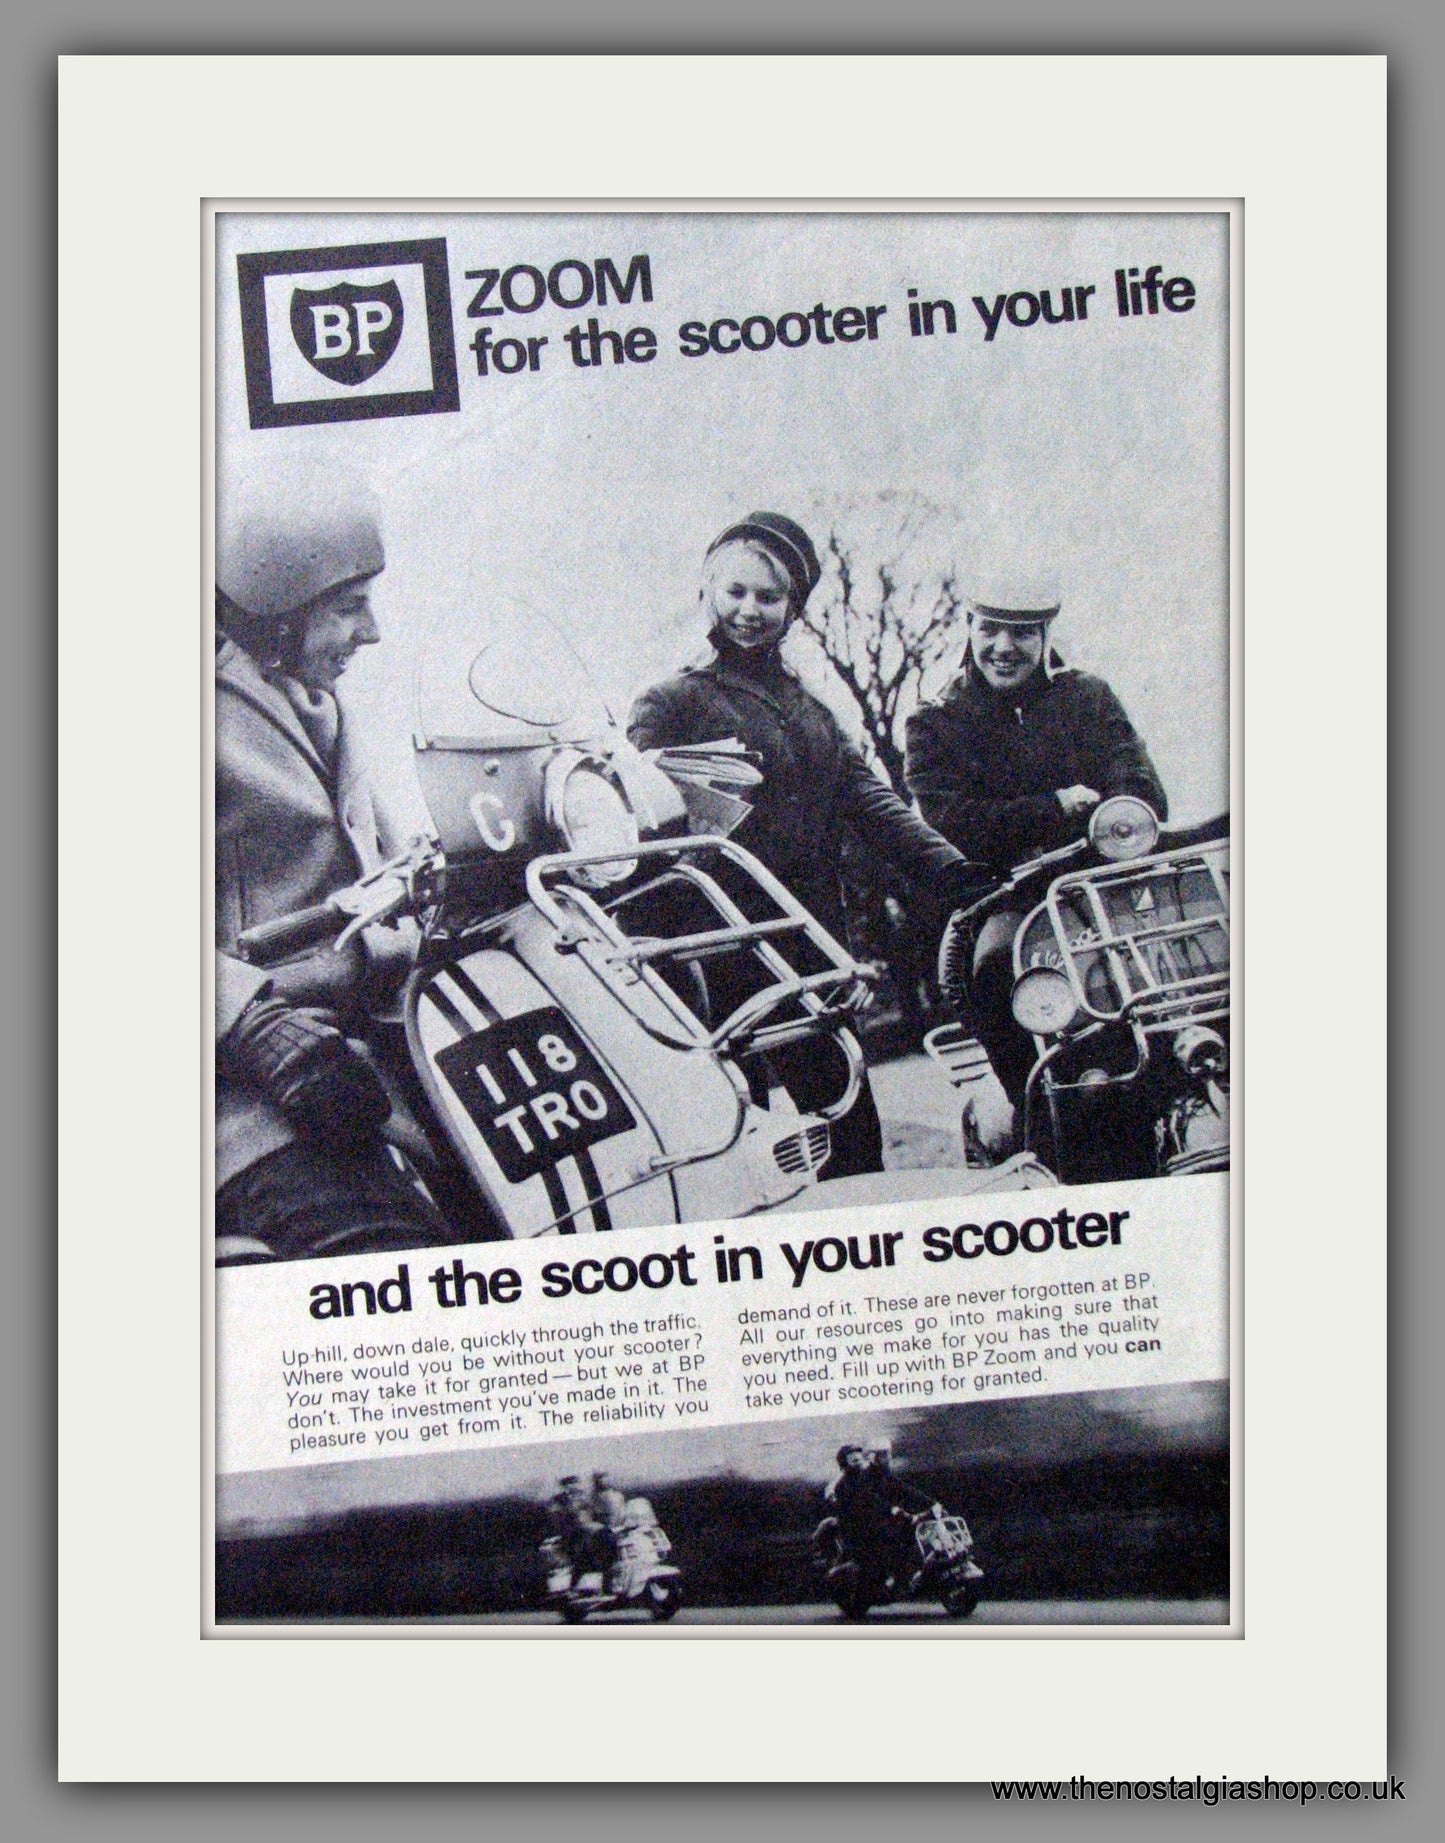 BP Zoom For The Scooter in Your Life. Original advert 1965 (ref AD53157)